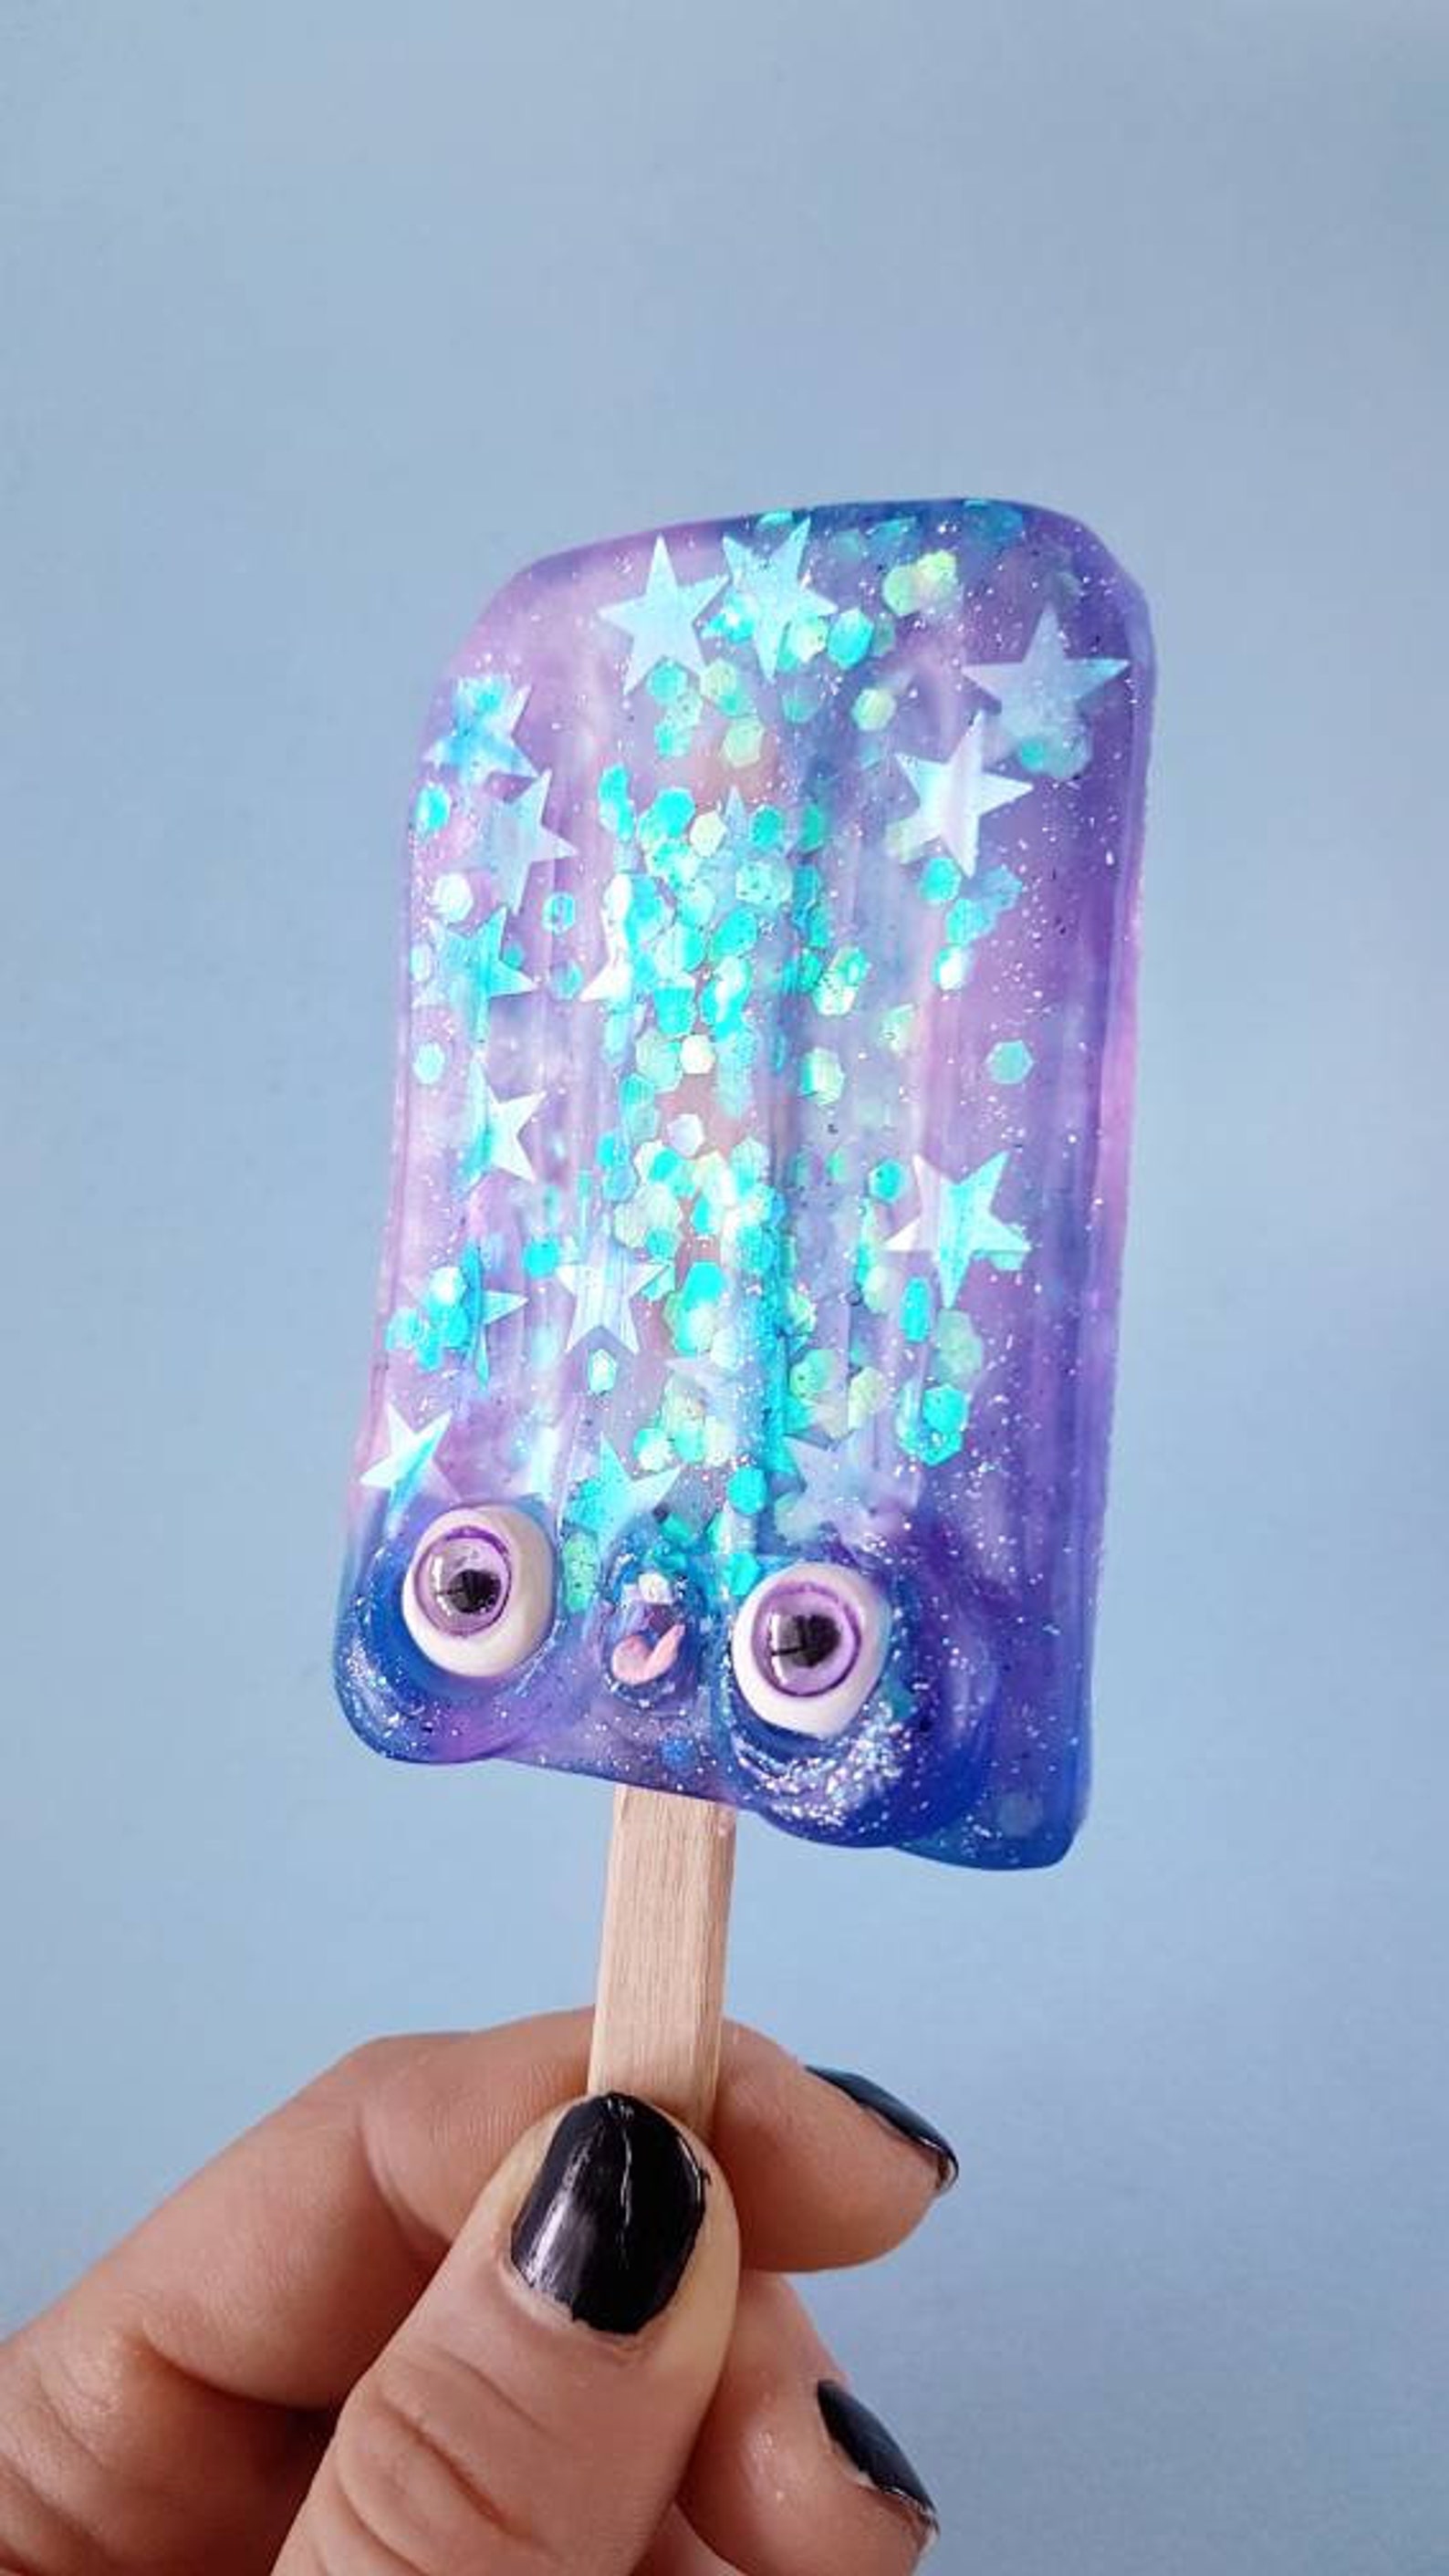 Galaxy popsicle spooky ice cream ooak handmade from resin | Etsy